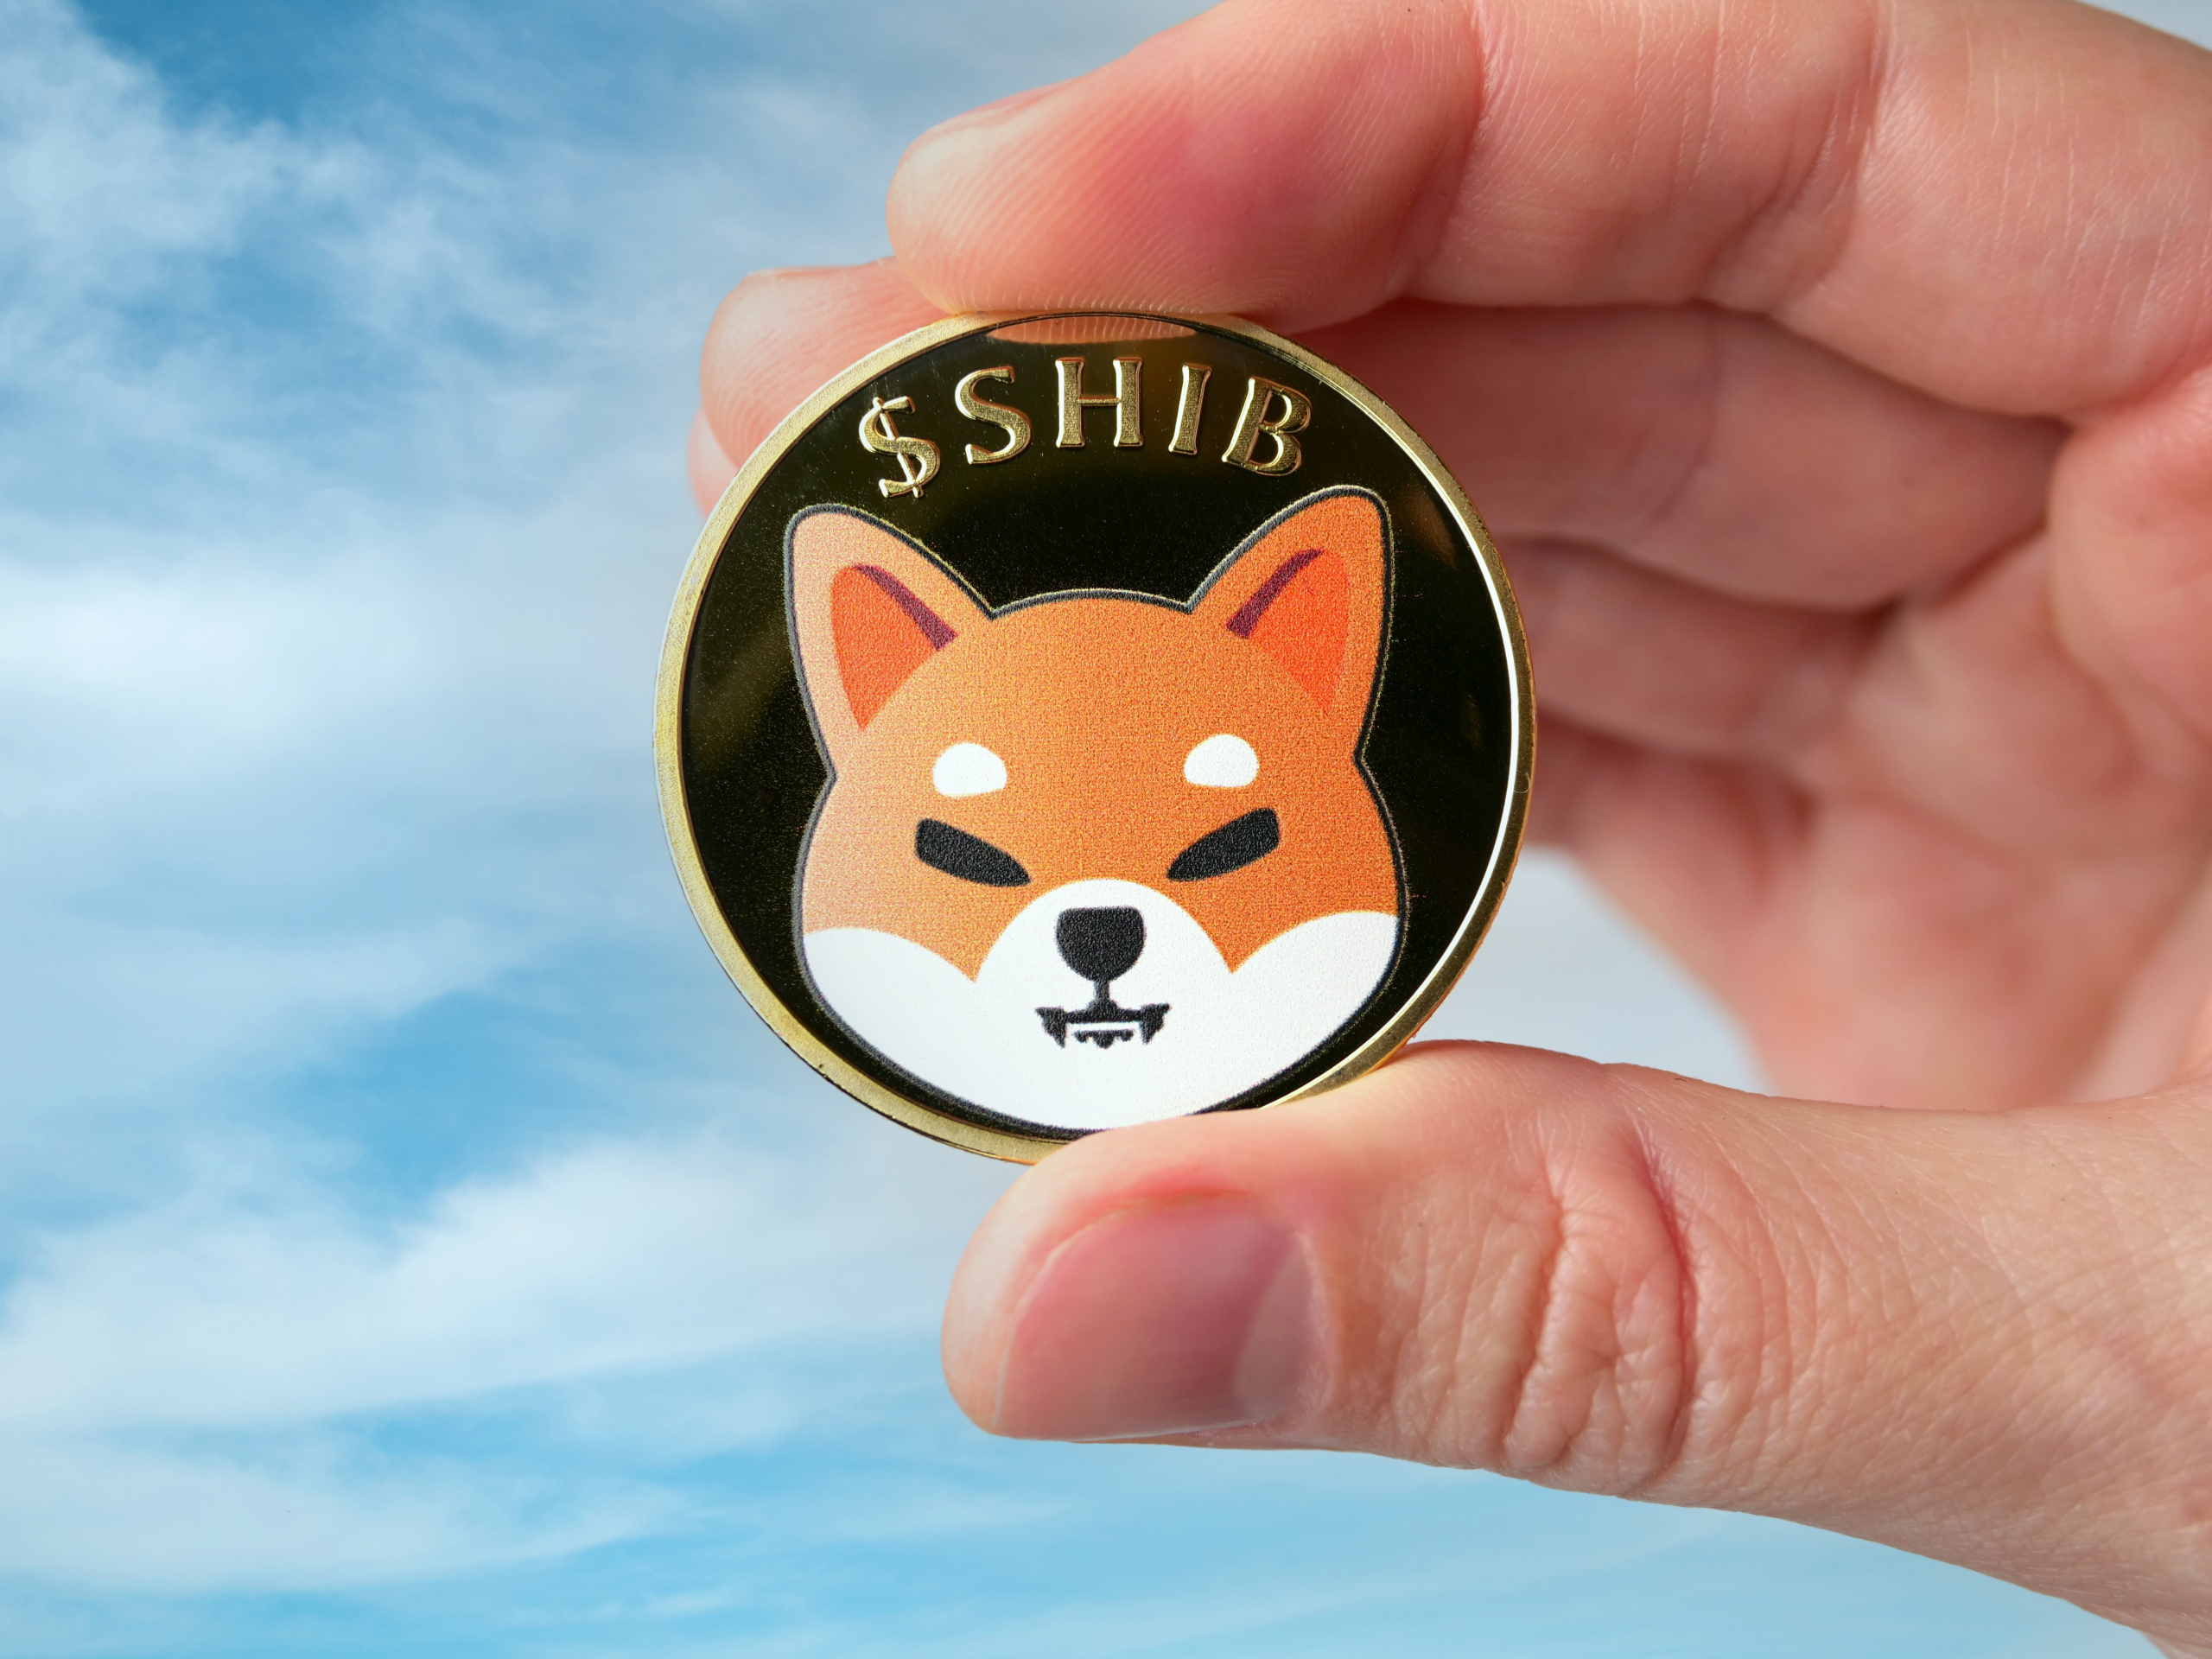 Crypto Whale buys 1 trillion Shiba Inu coins in 1 day
